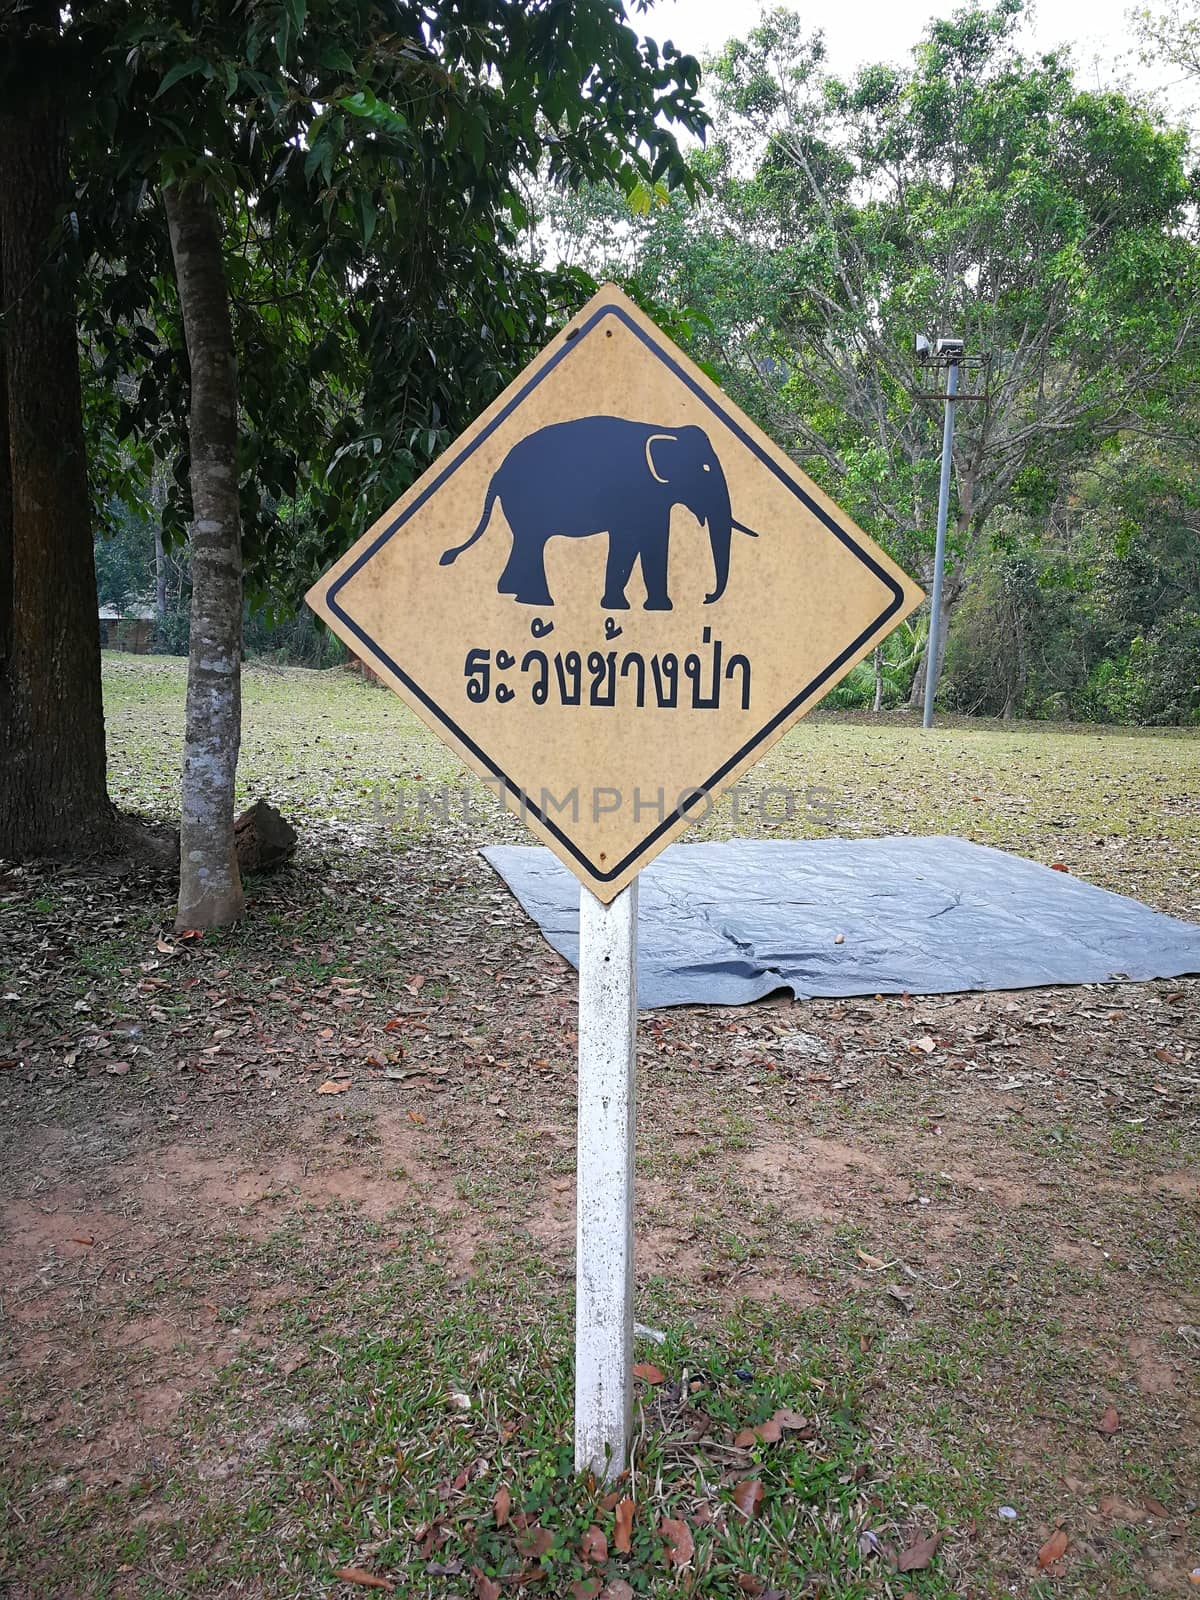 warning plate and Thailand language in photo mean "warning elephants from forest"